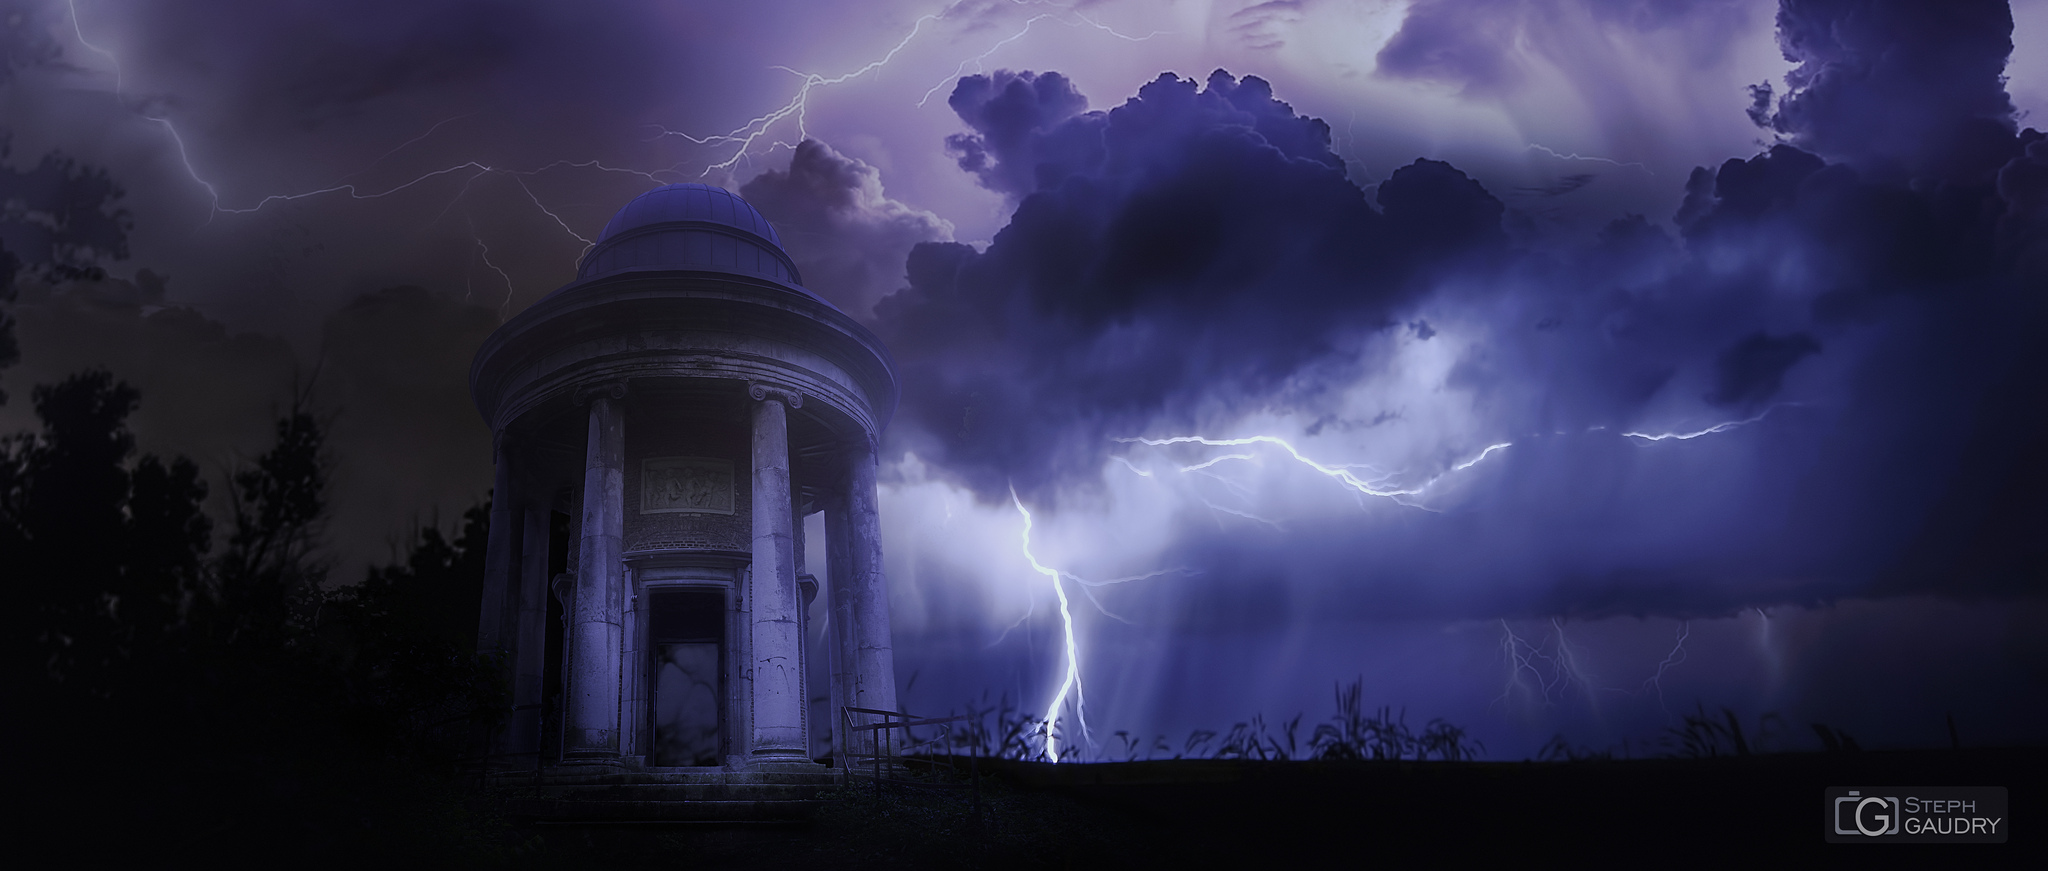 Storm rumbling on lost  temple